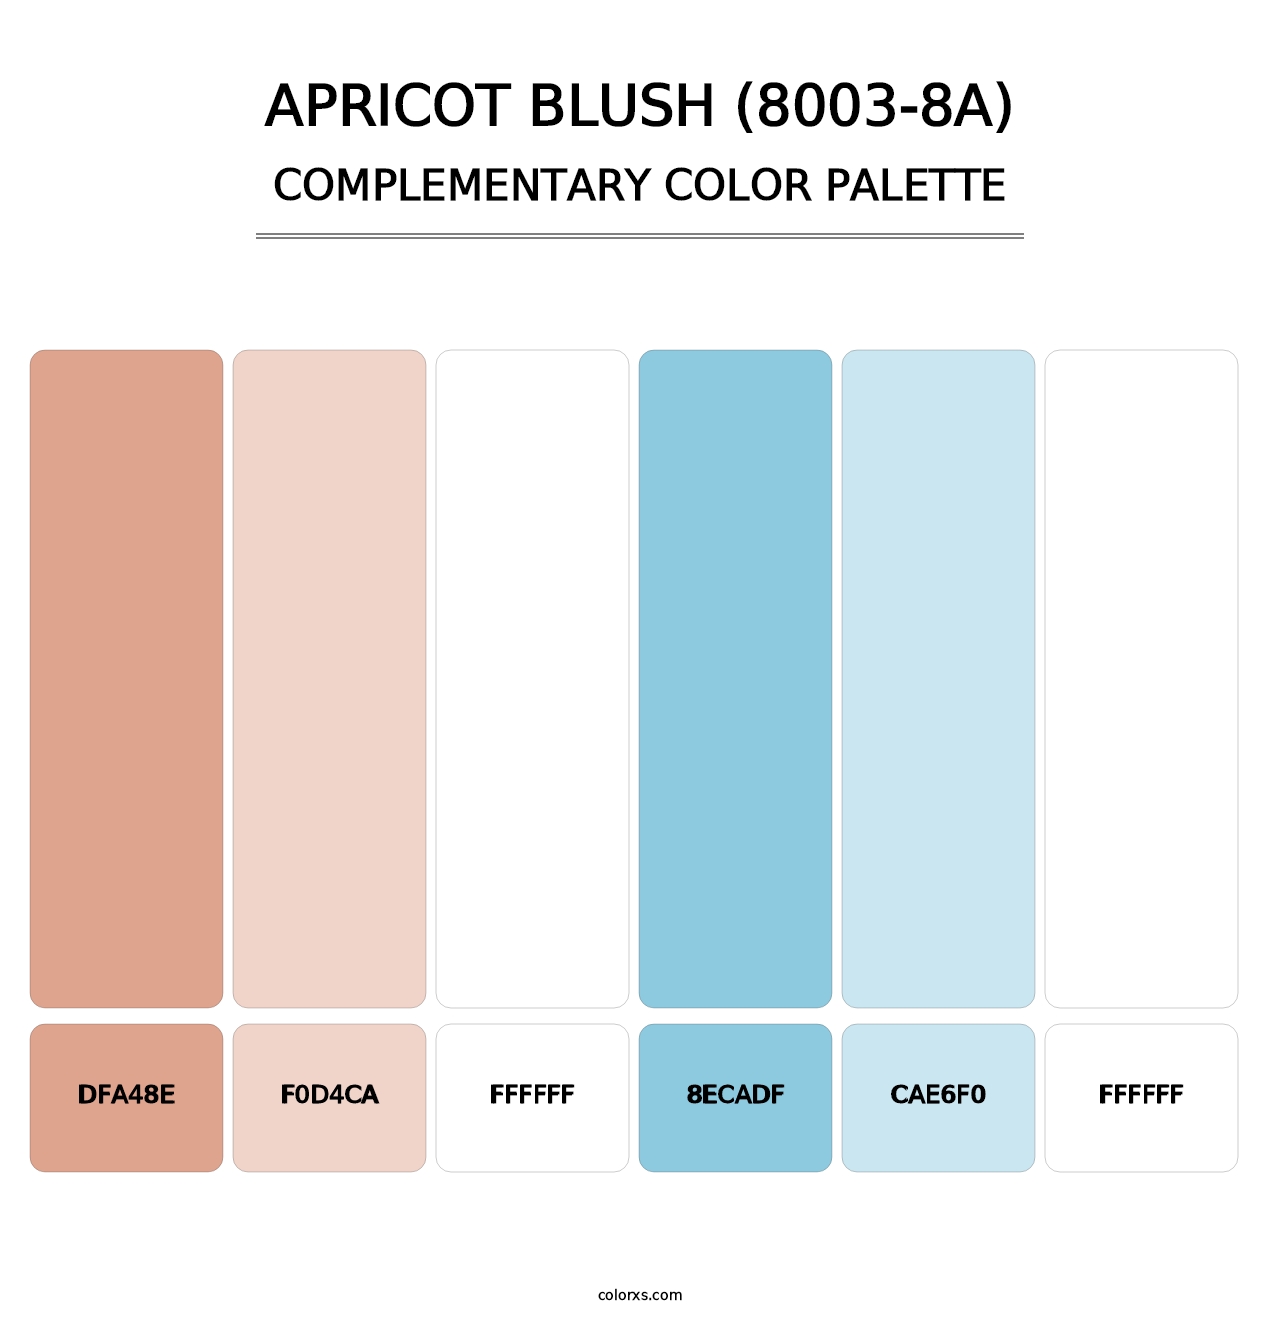 Apricot Blush (8003-8A) - Complementary Color Palette